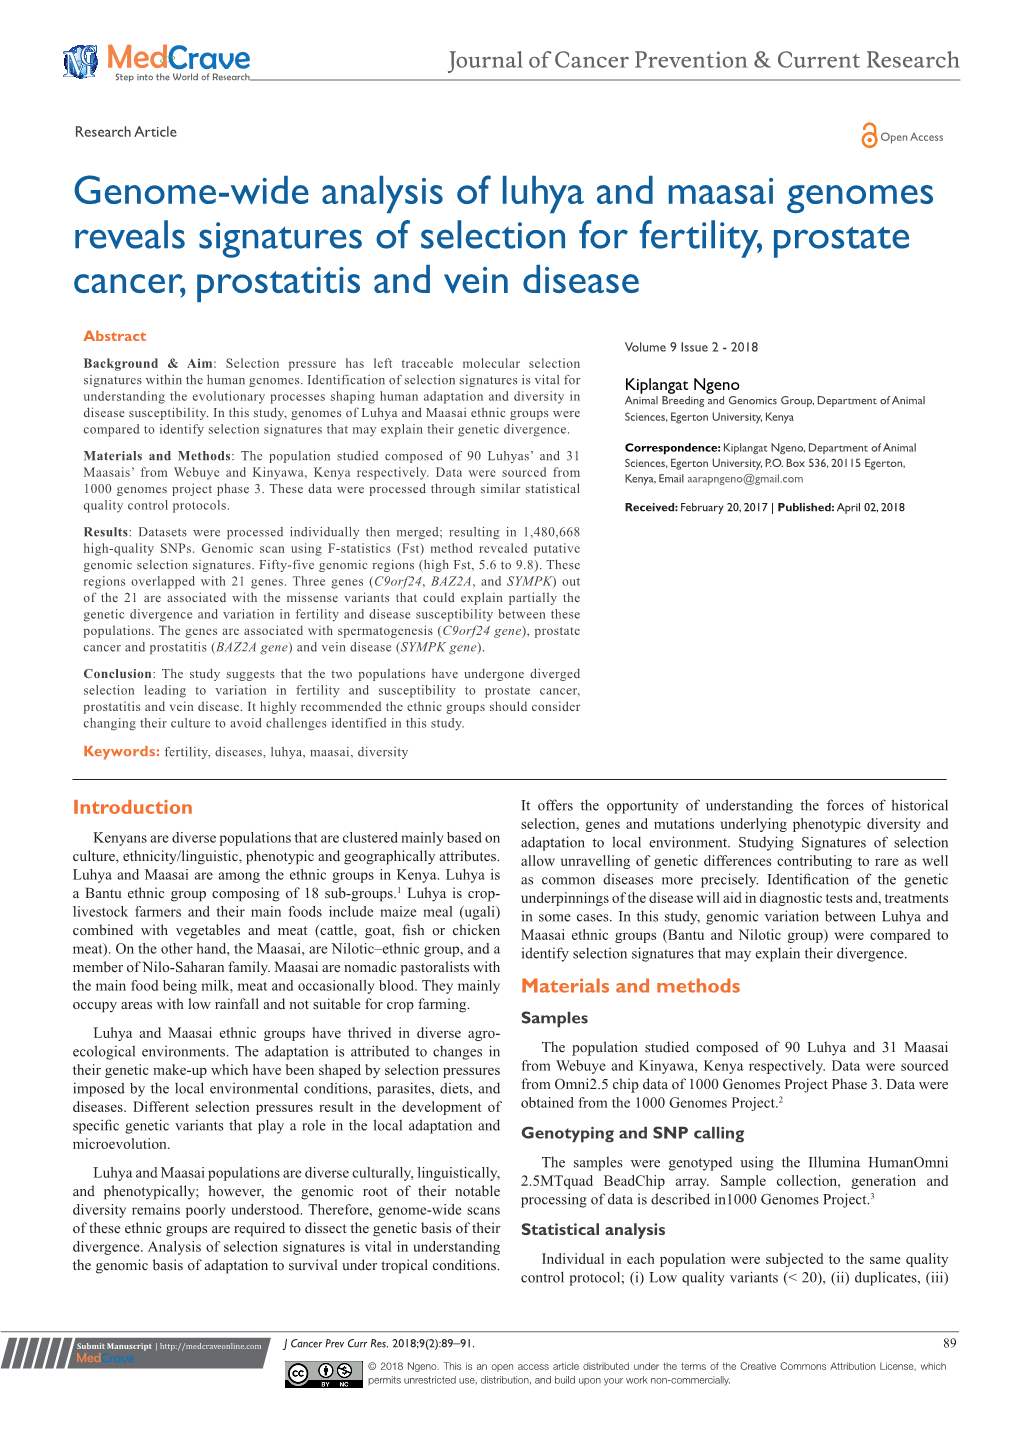 Genome-Wide Analysis of Luhya and Maasai Genomes Reveals Signatures of Selection for Fertility, Prostate Cancer, Prostatitis and Vein Disease